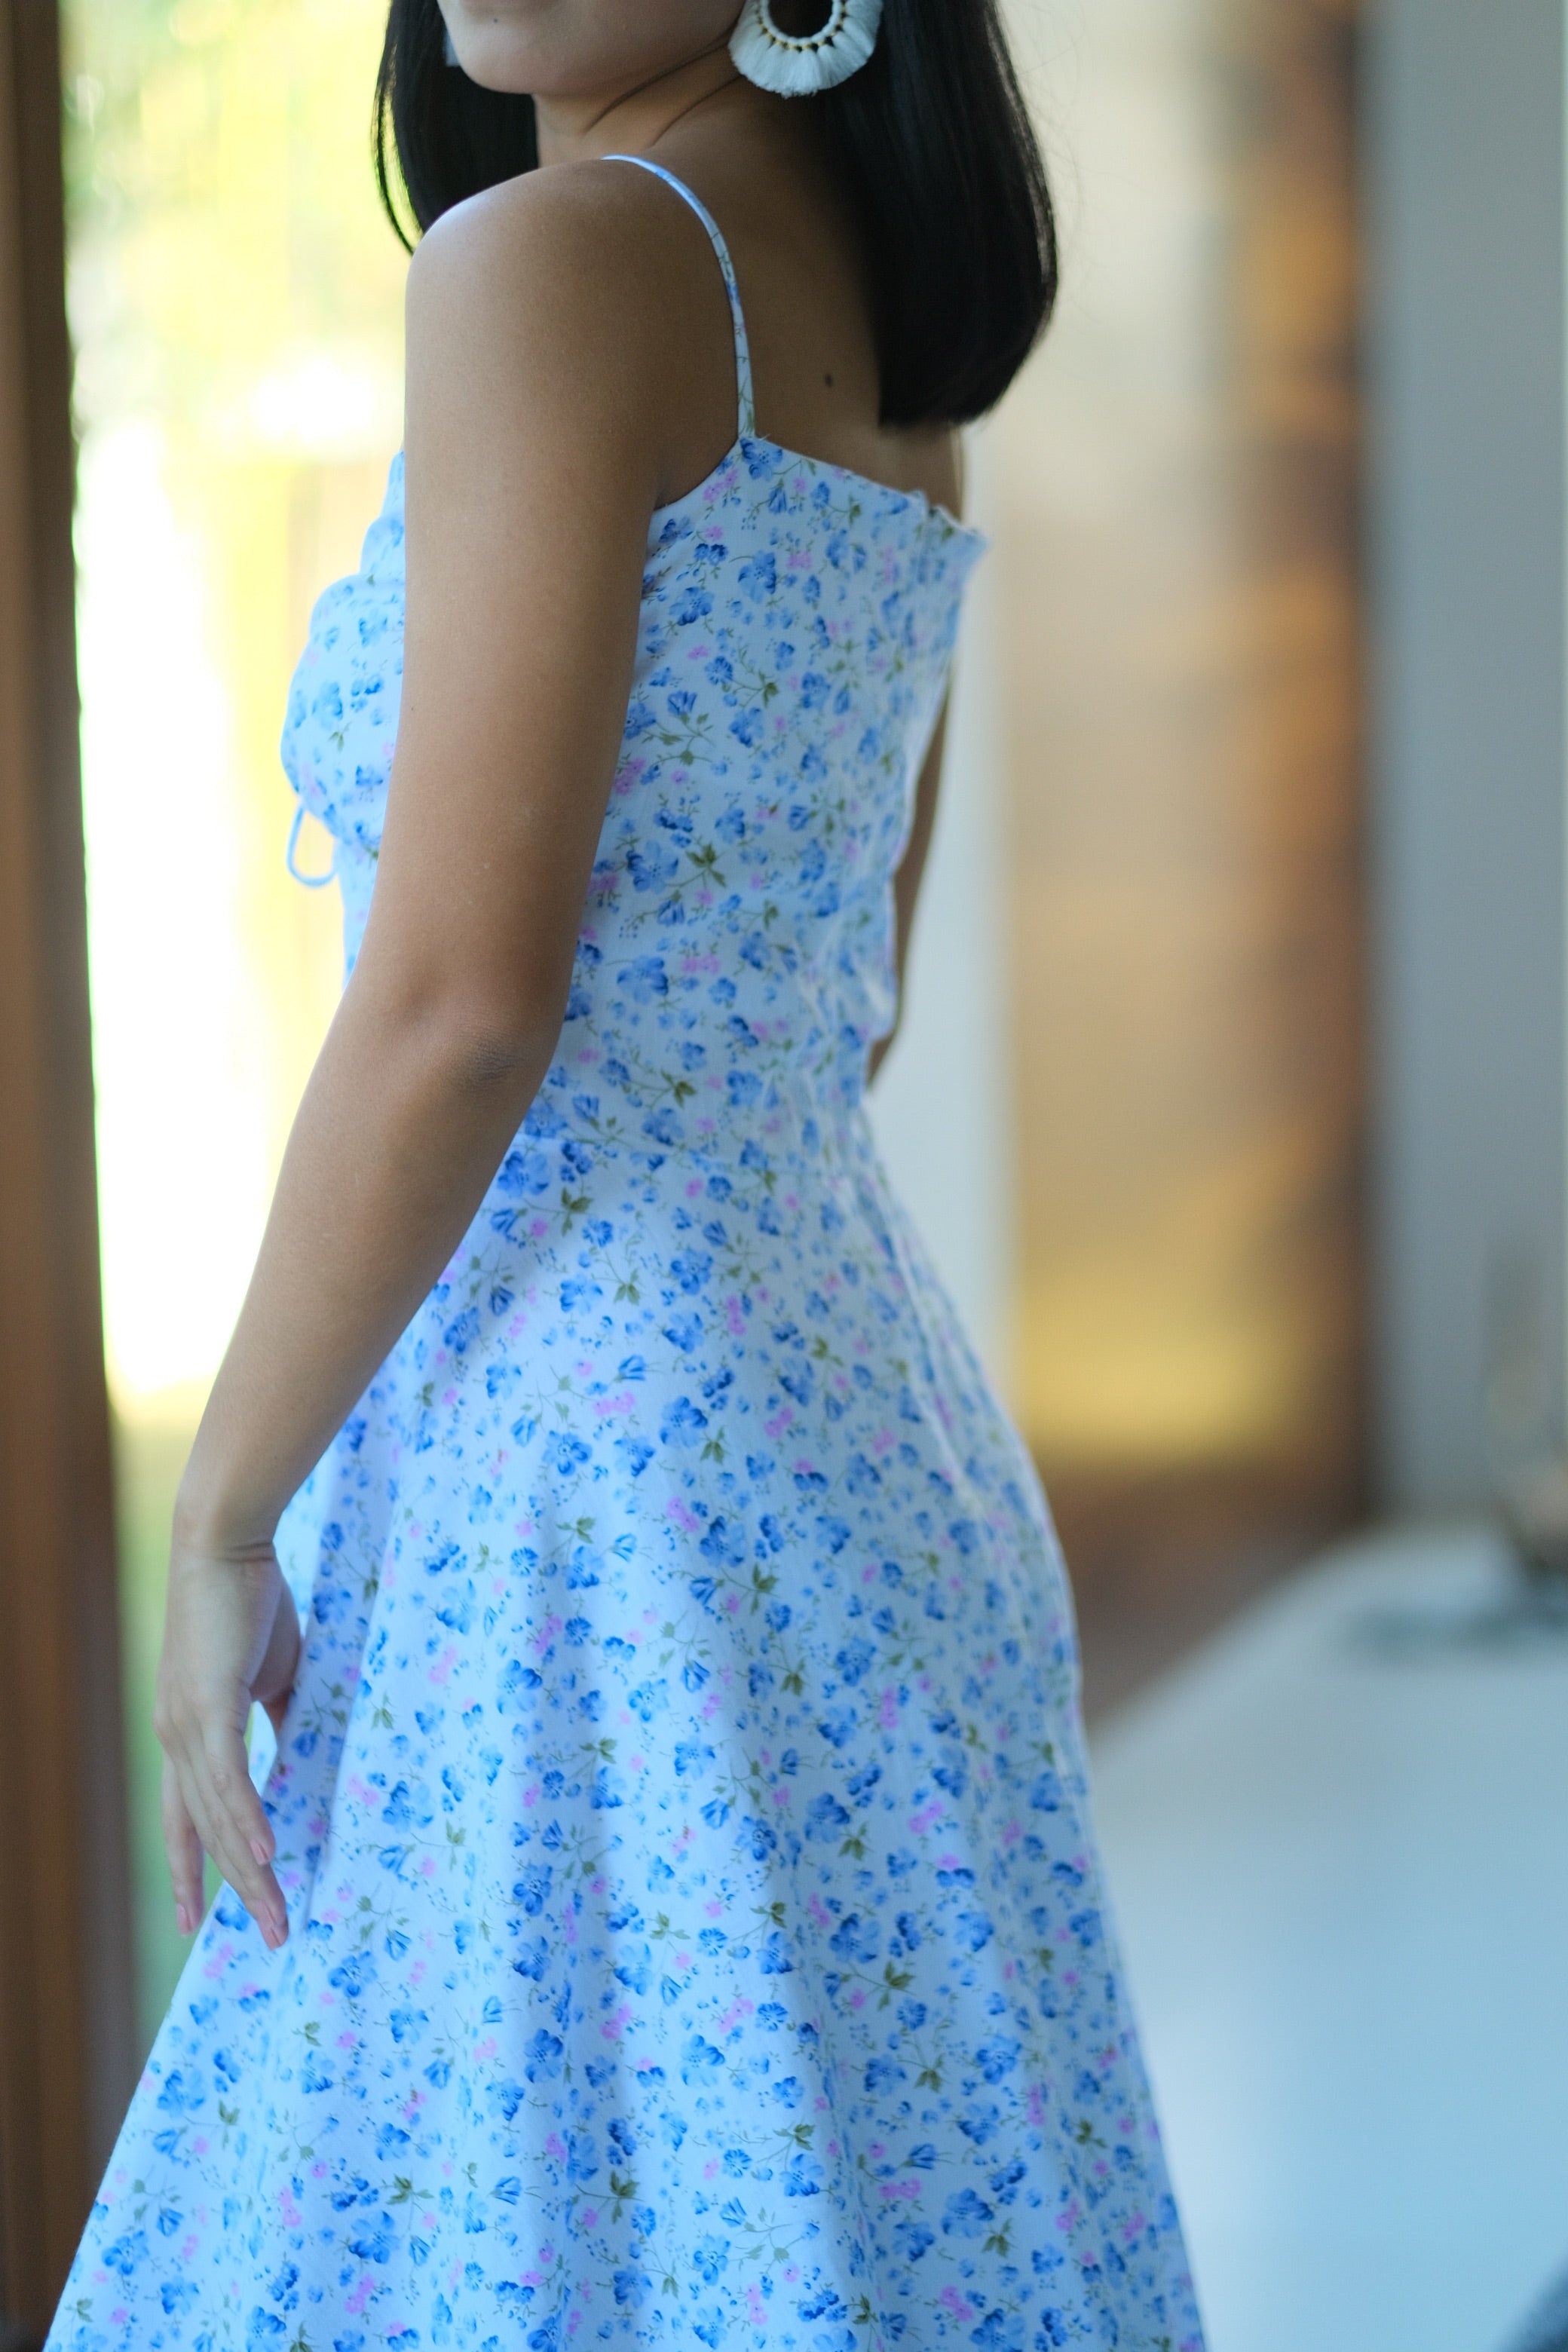 Alexa Dress in Royal Blue Floral with Pink